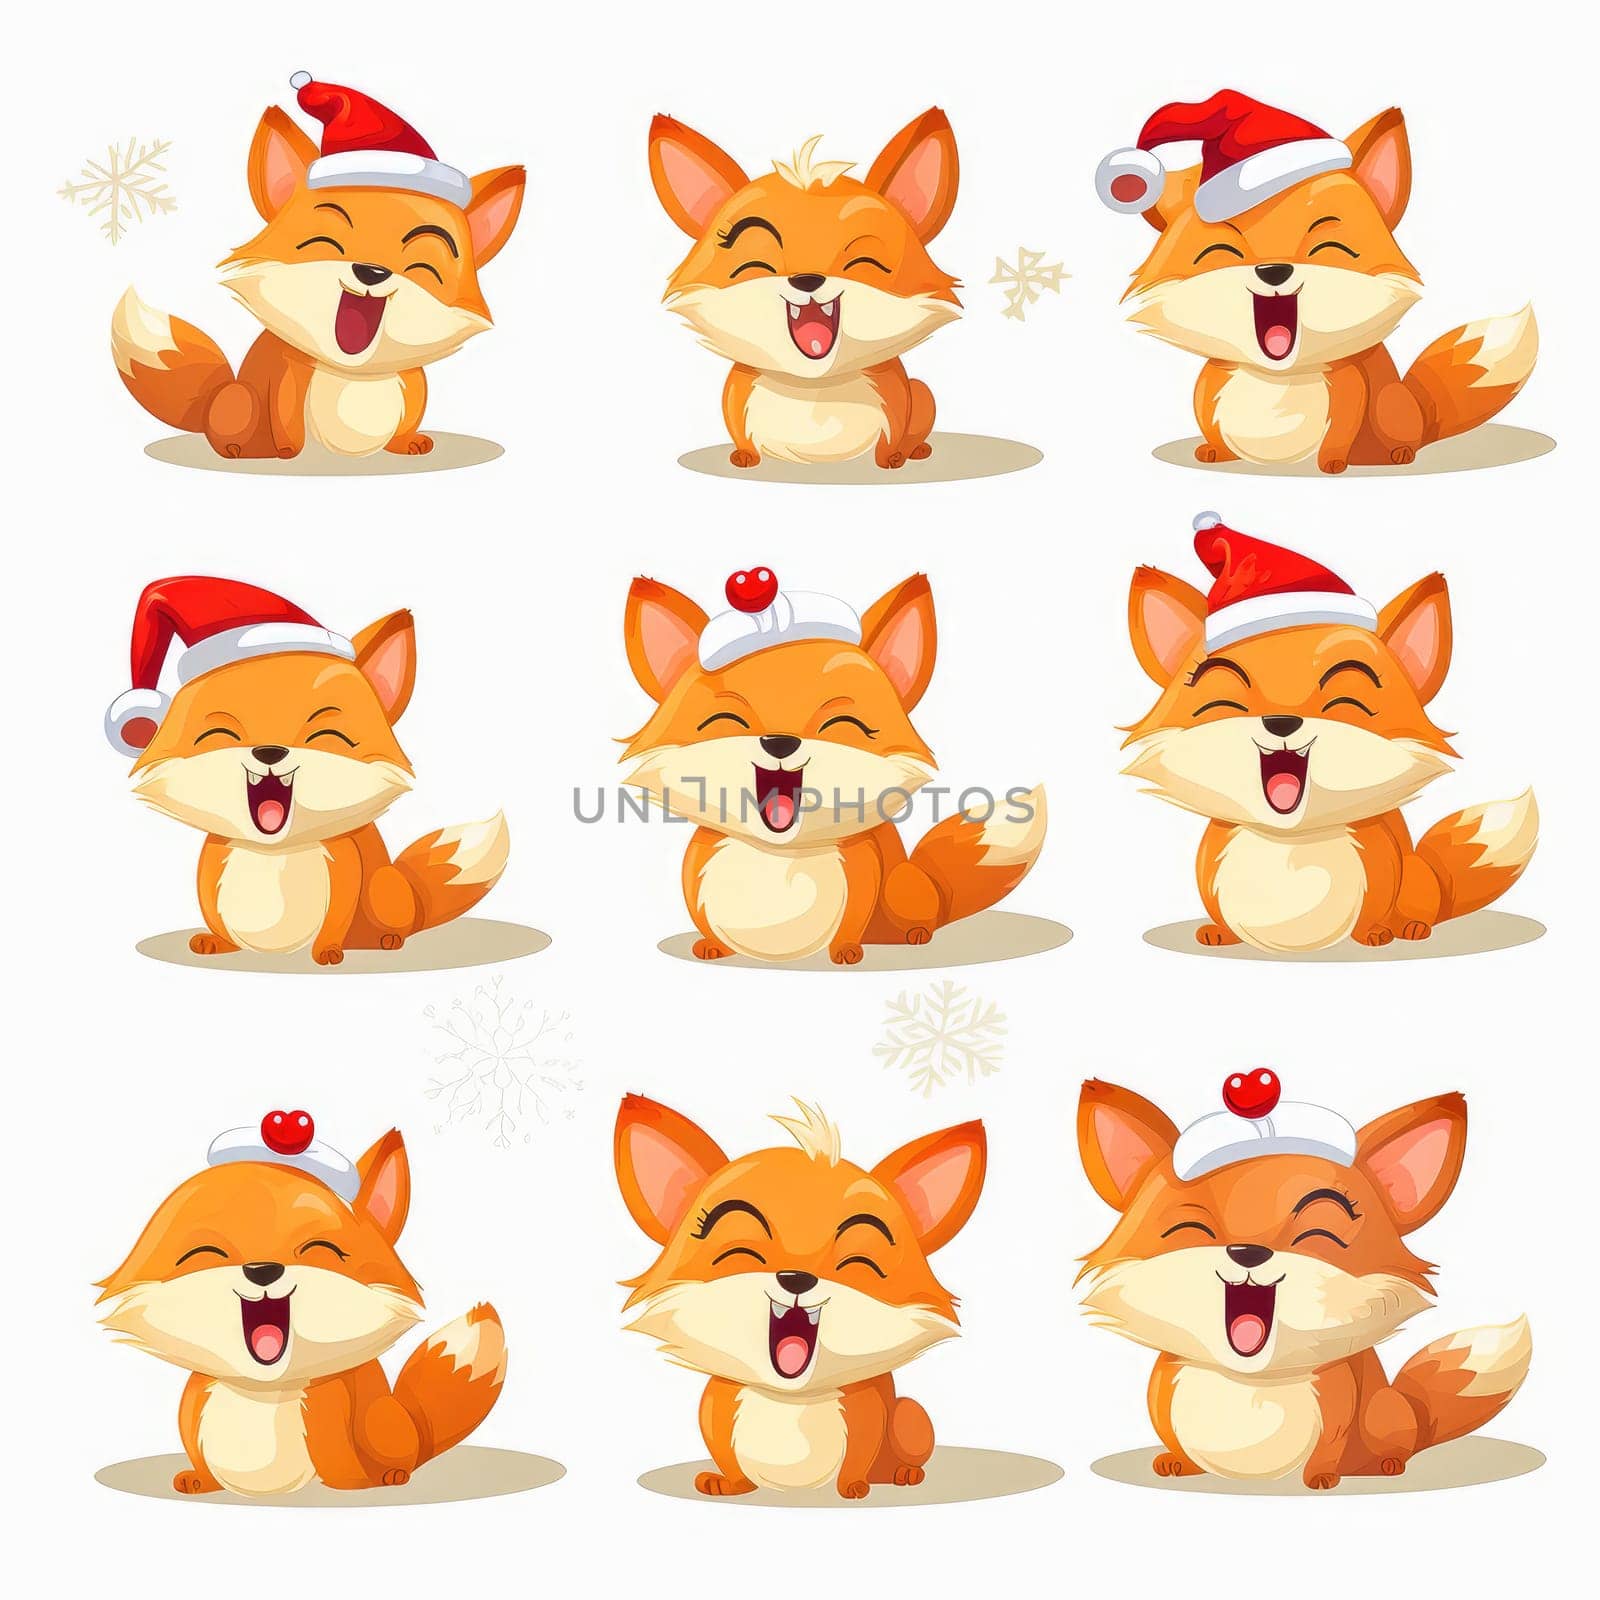 New Year emoticons funny foxes emoji. Cartoon style, New Year, Christmas